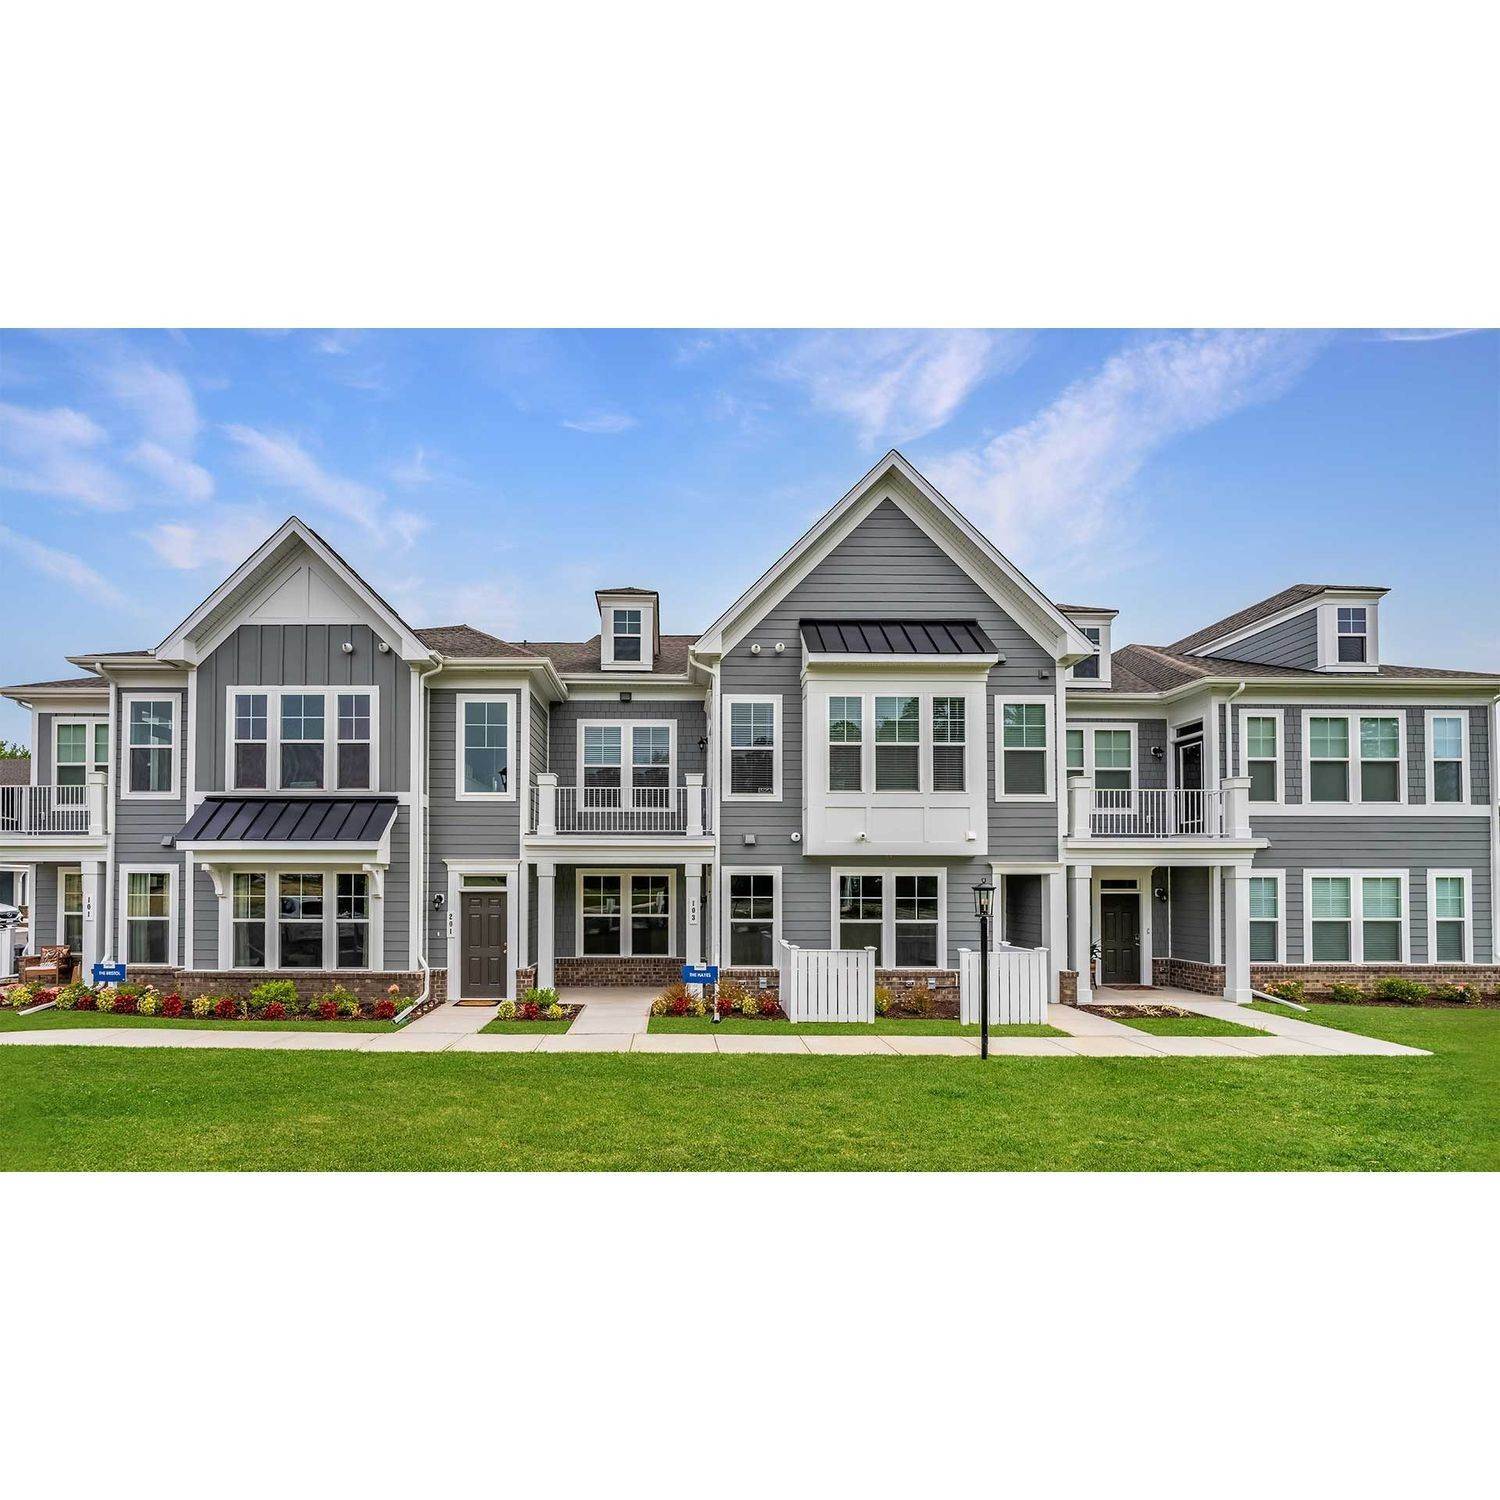 4. The Pointe at Twin Hickory building at 4605 Pouncey Tract Road, Glen Allen, VA 23059